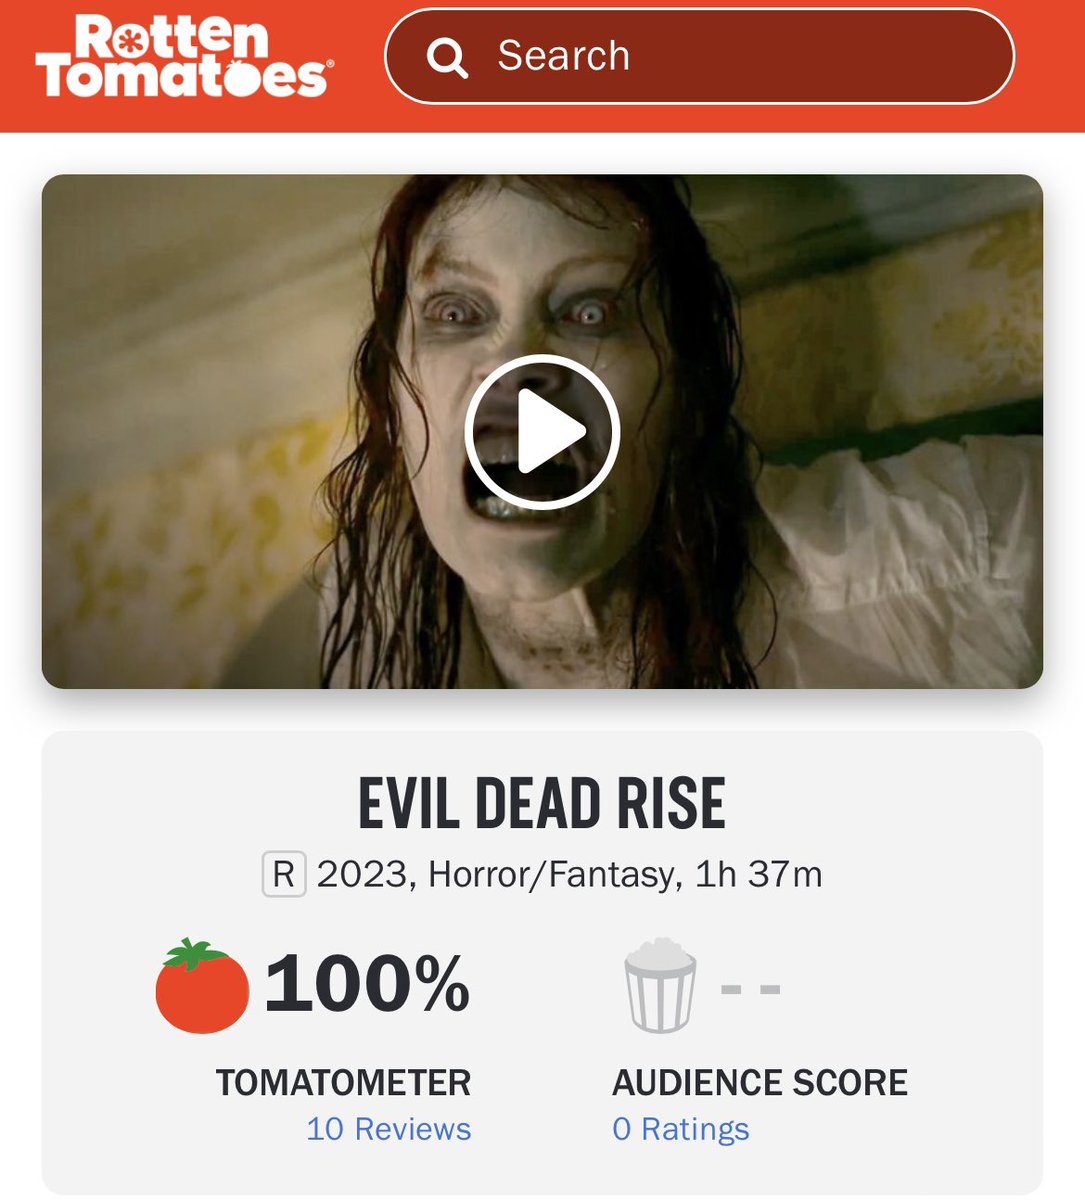 Film Updates on X: 'EVIL DEAD RISE' debuts with a Rotten Tomatoes